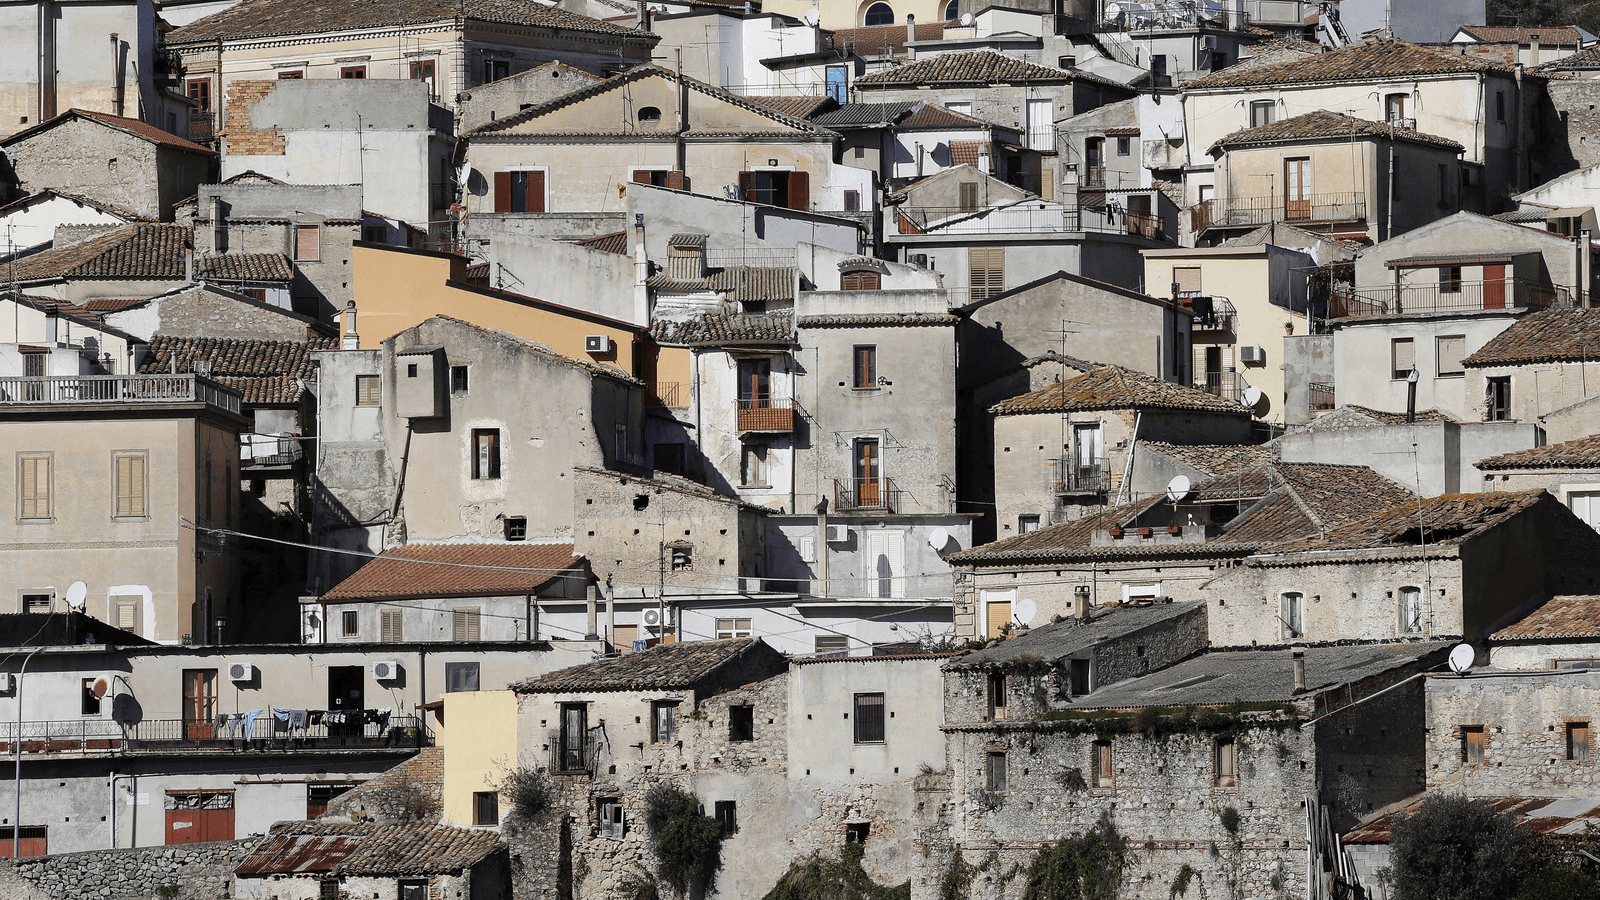 The town of Riace is seen in the southern Italian region of Calabria, Nov. 22, 2013.